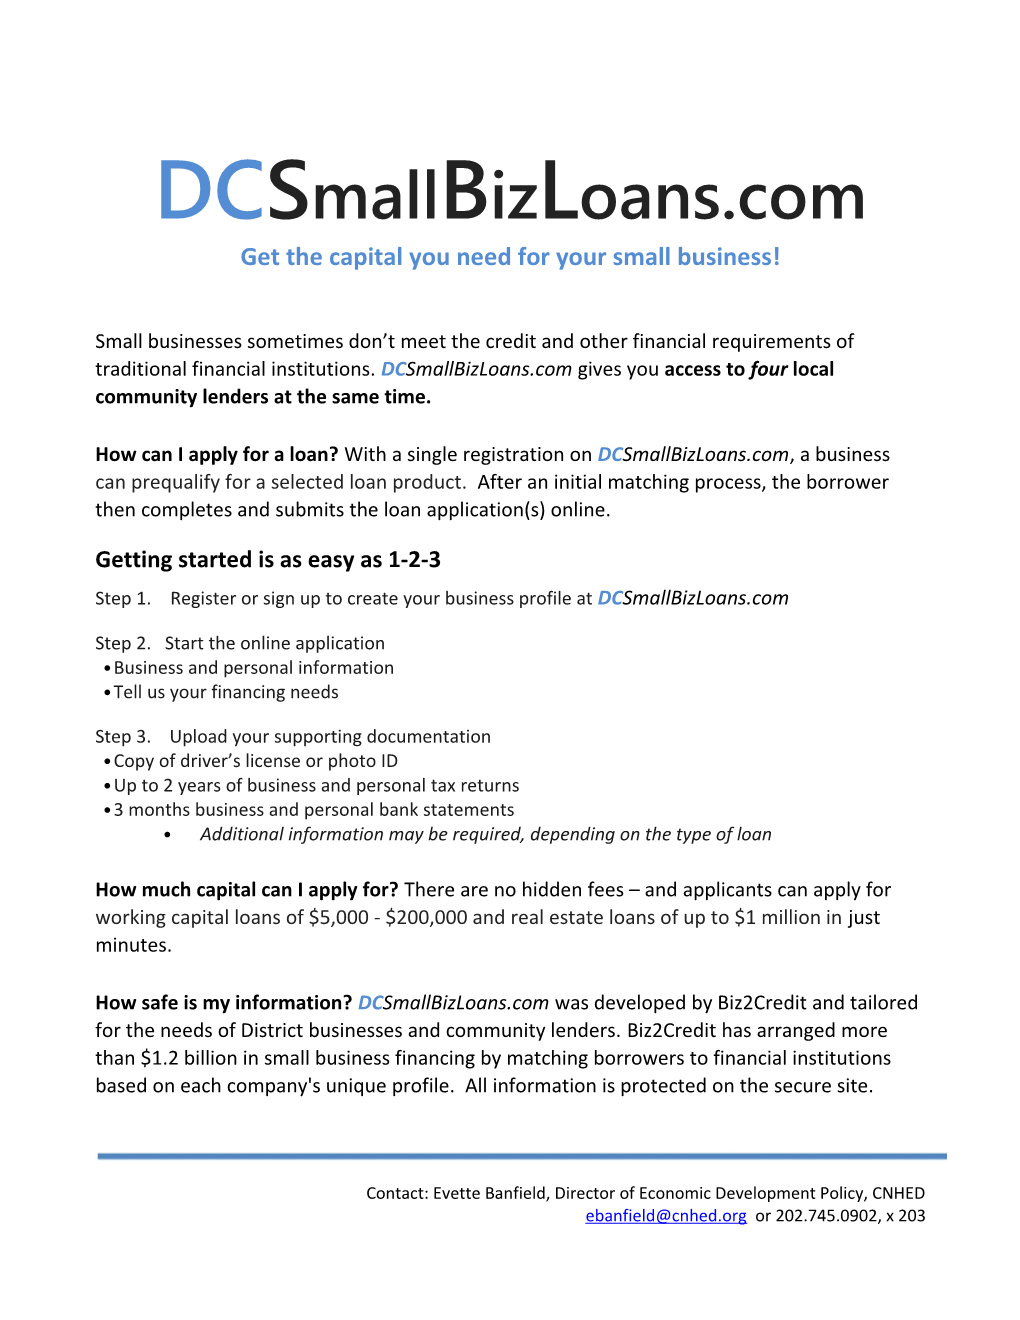 Get the Capital You Need for Your Small Business!